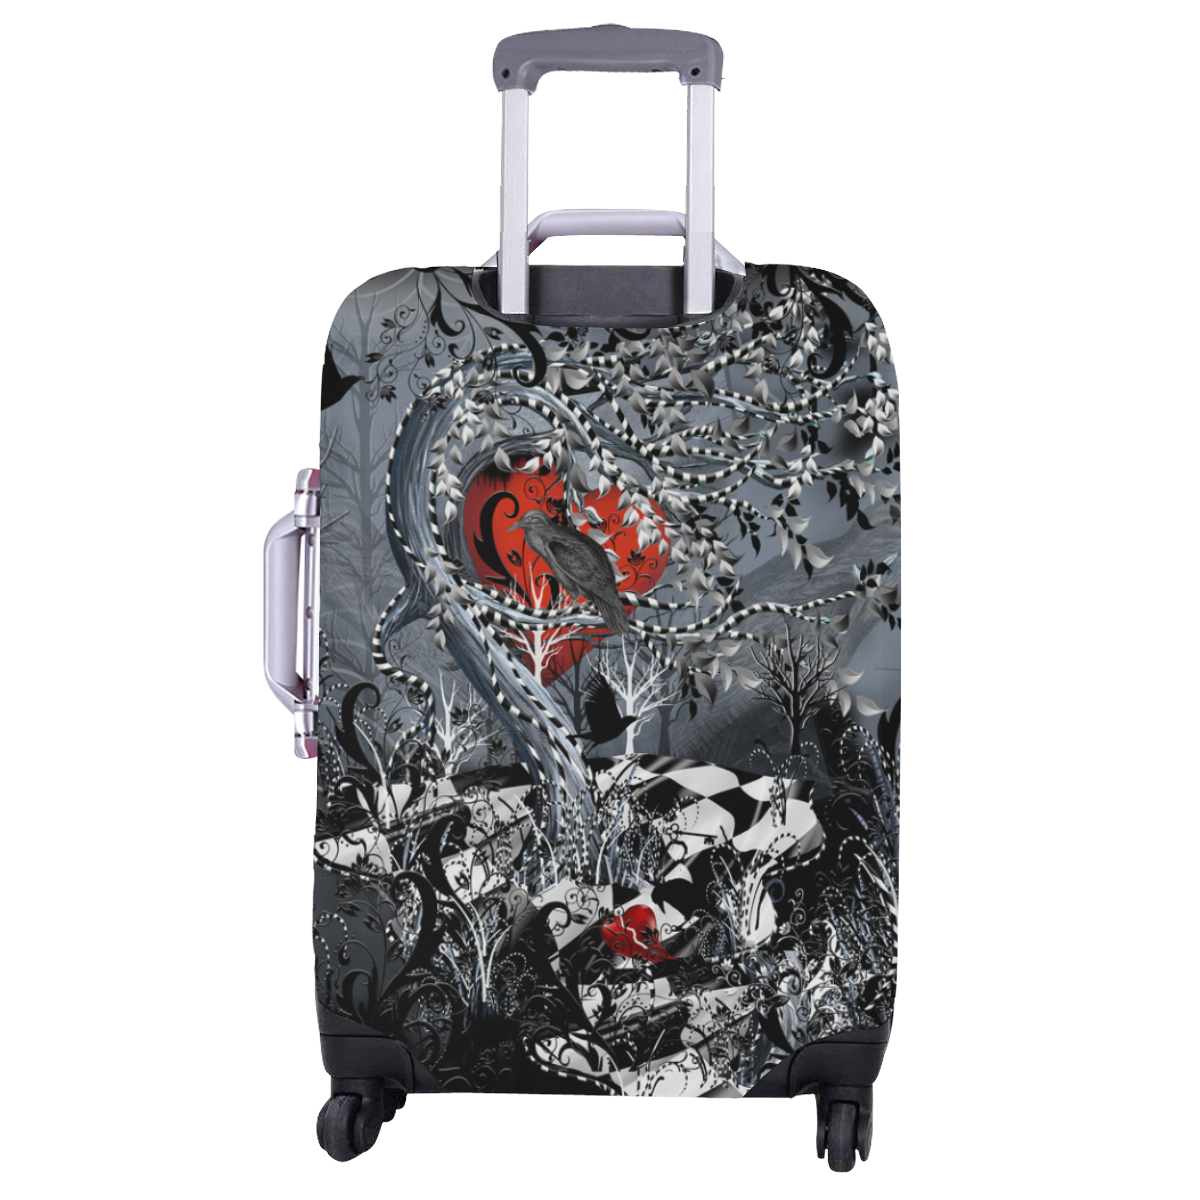 Luggage Cover Raven Heart Print By Juleez Luggage Cover/Large 26"-28"